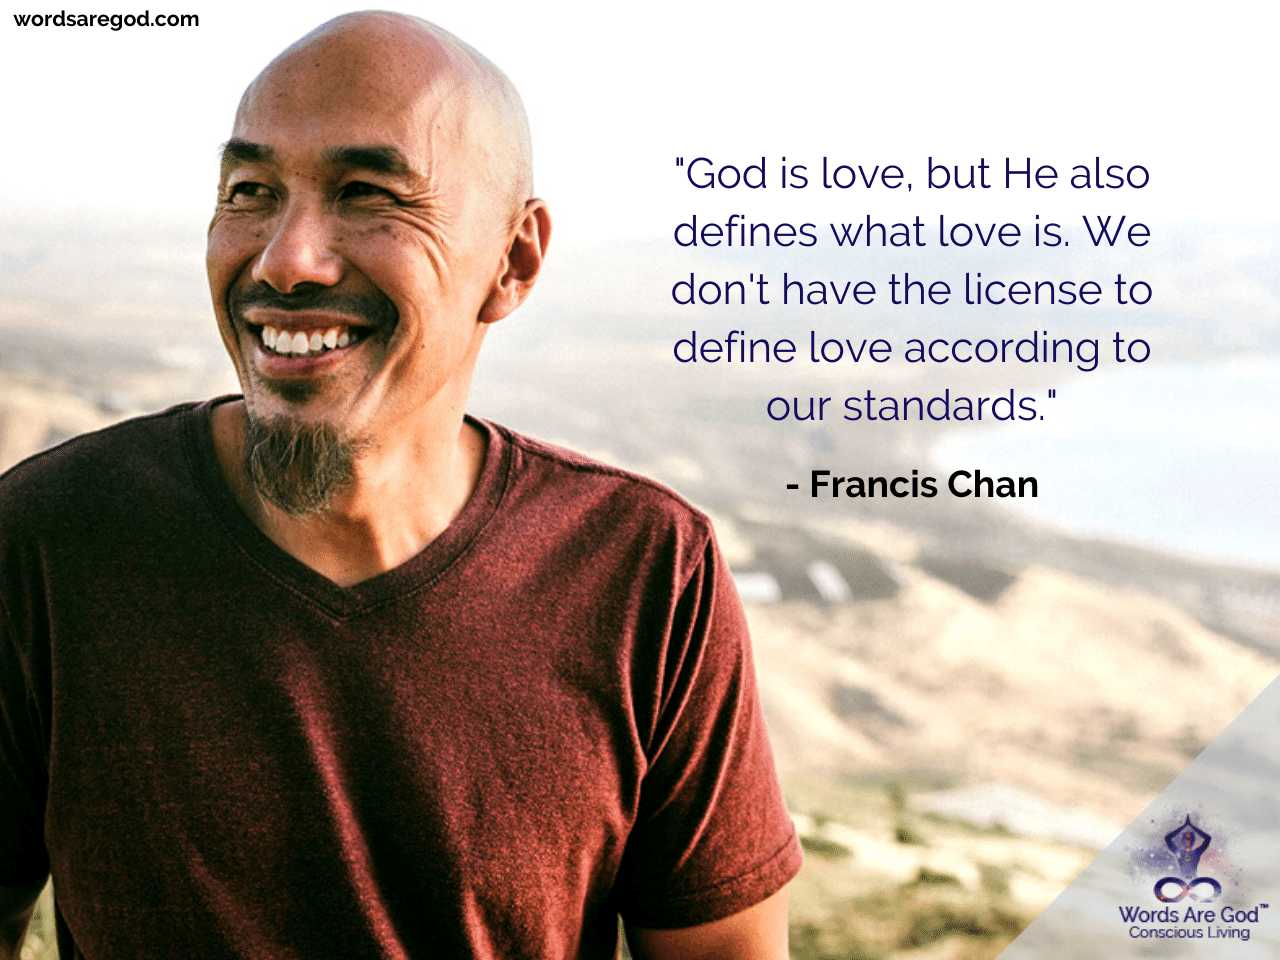 Francis Chan Best Quote by Francis Chan